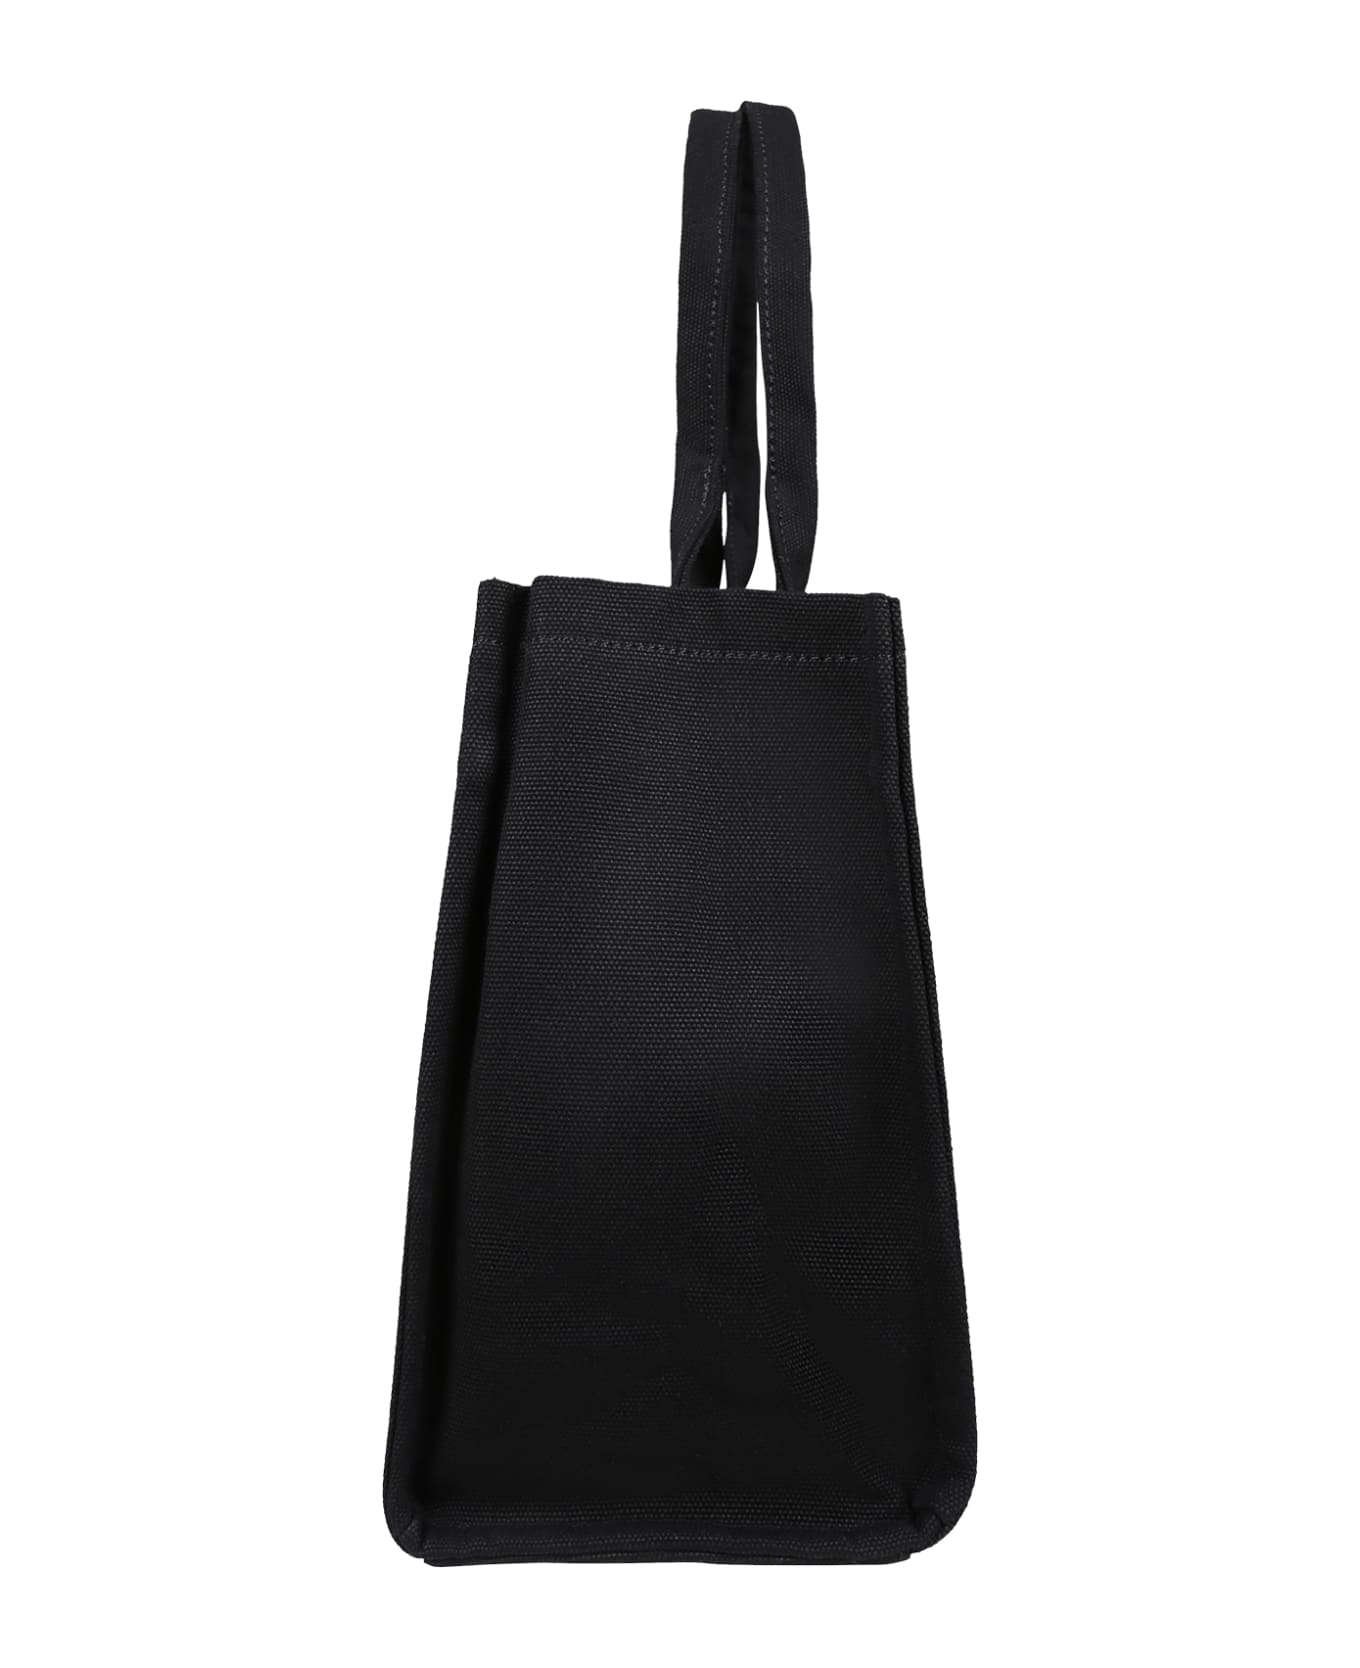 Barrow Black Bag For Girl With Logo And Smiley - Black アクセサリー＆ギフト